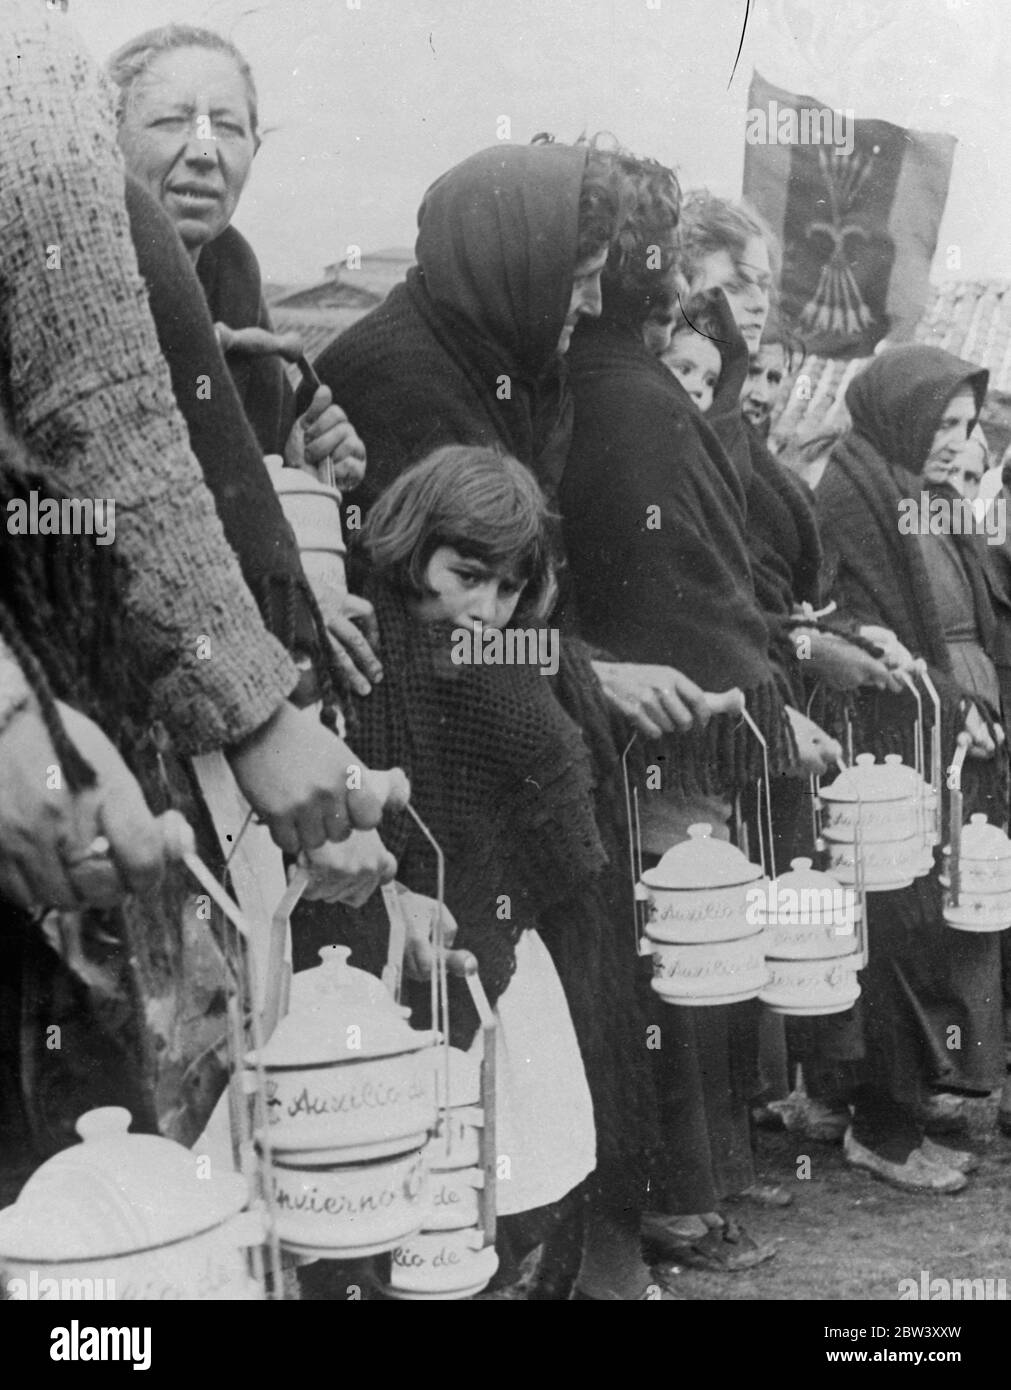 She was hungry , too . A little girl of Salamanca huddled in her shawl against the cold as she waited in a long queue to receive food from the Winter Help organisation formed by Fascists in the part of Spain fuled by General Franco to relieve the distress of the civil war . 10 March 1937 Stock Photo